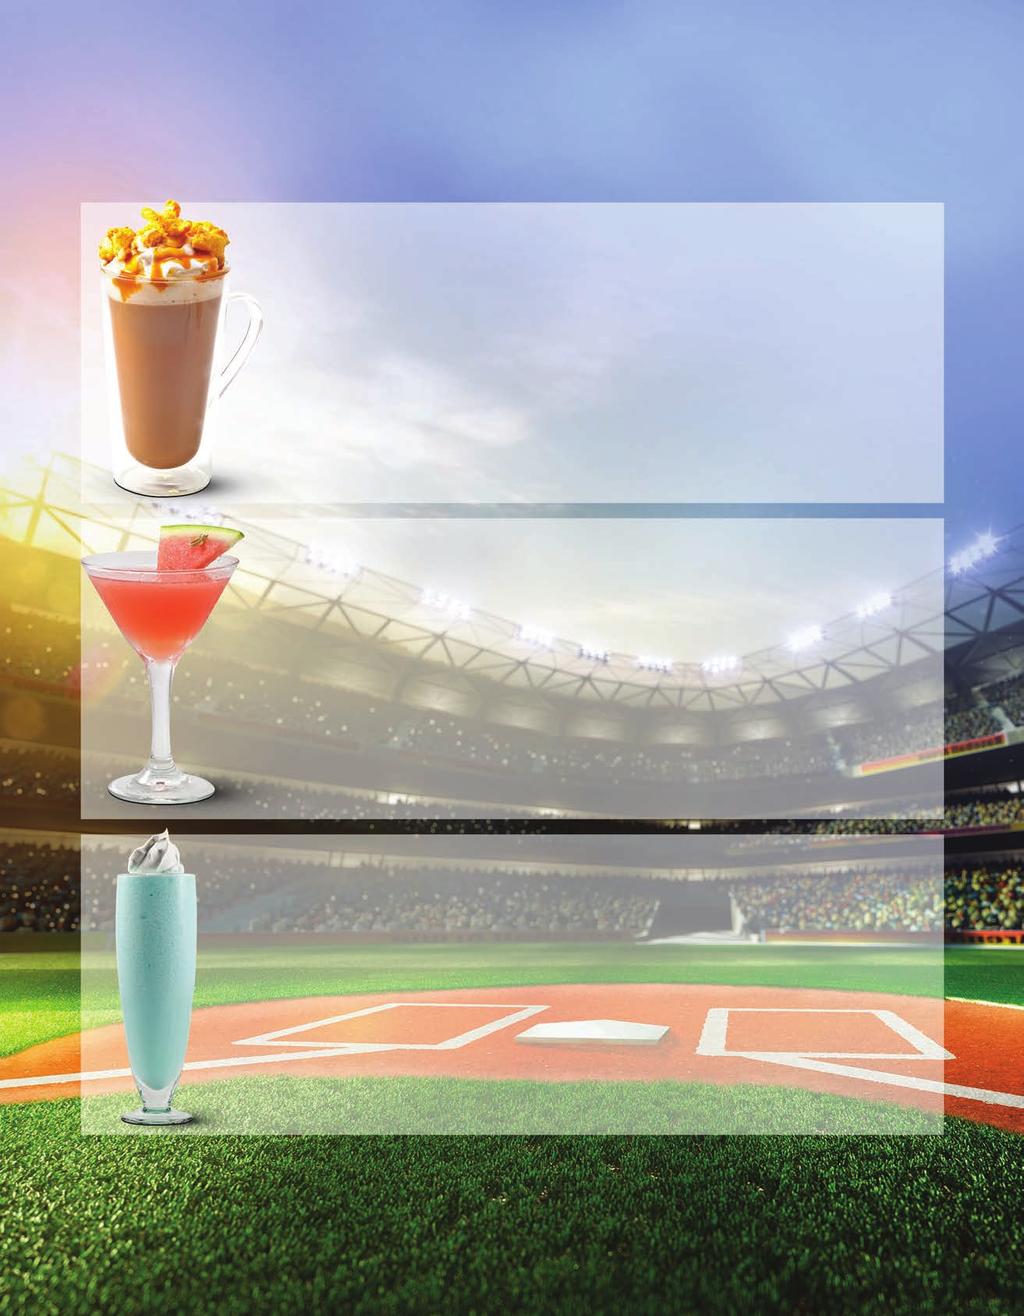 It s game time! Change up your menu offerings and be the first to pitch these all-star beverages to your customers they re sure to be a hit! CARAMEL CORN LATTE Glass size: 16 oz. 1/2 oz.